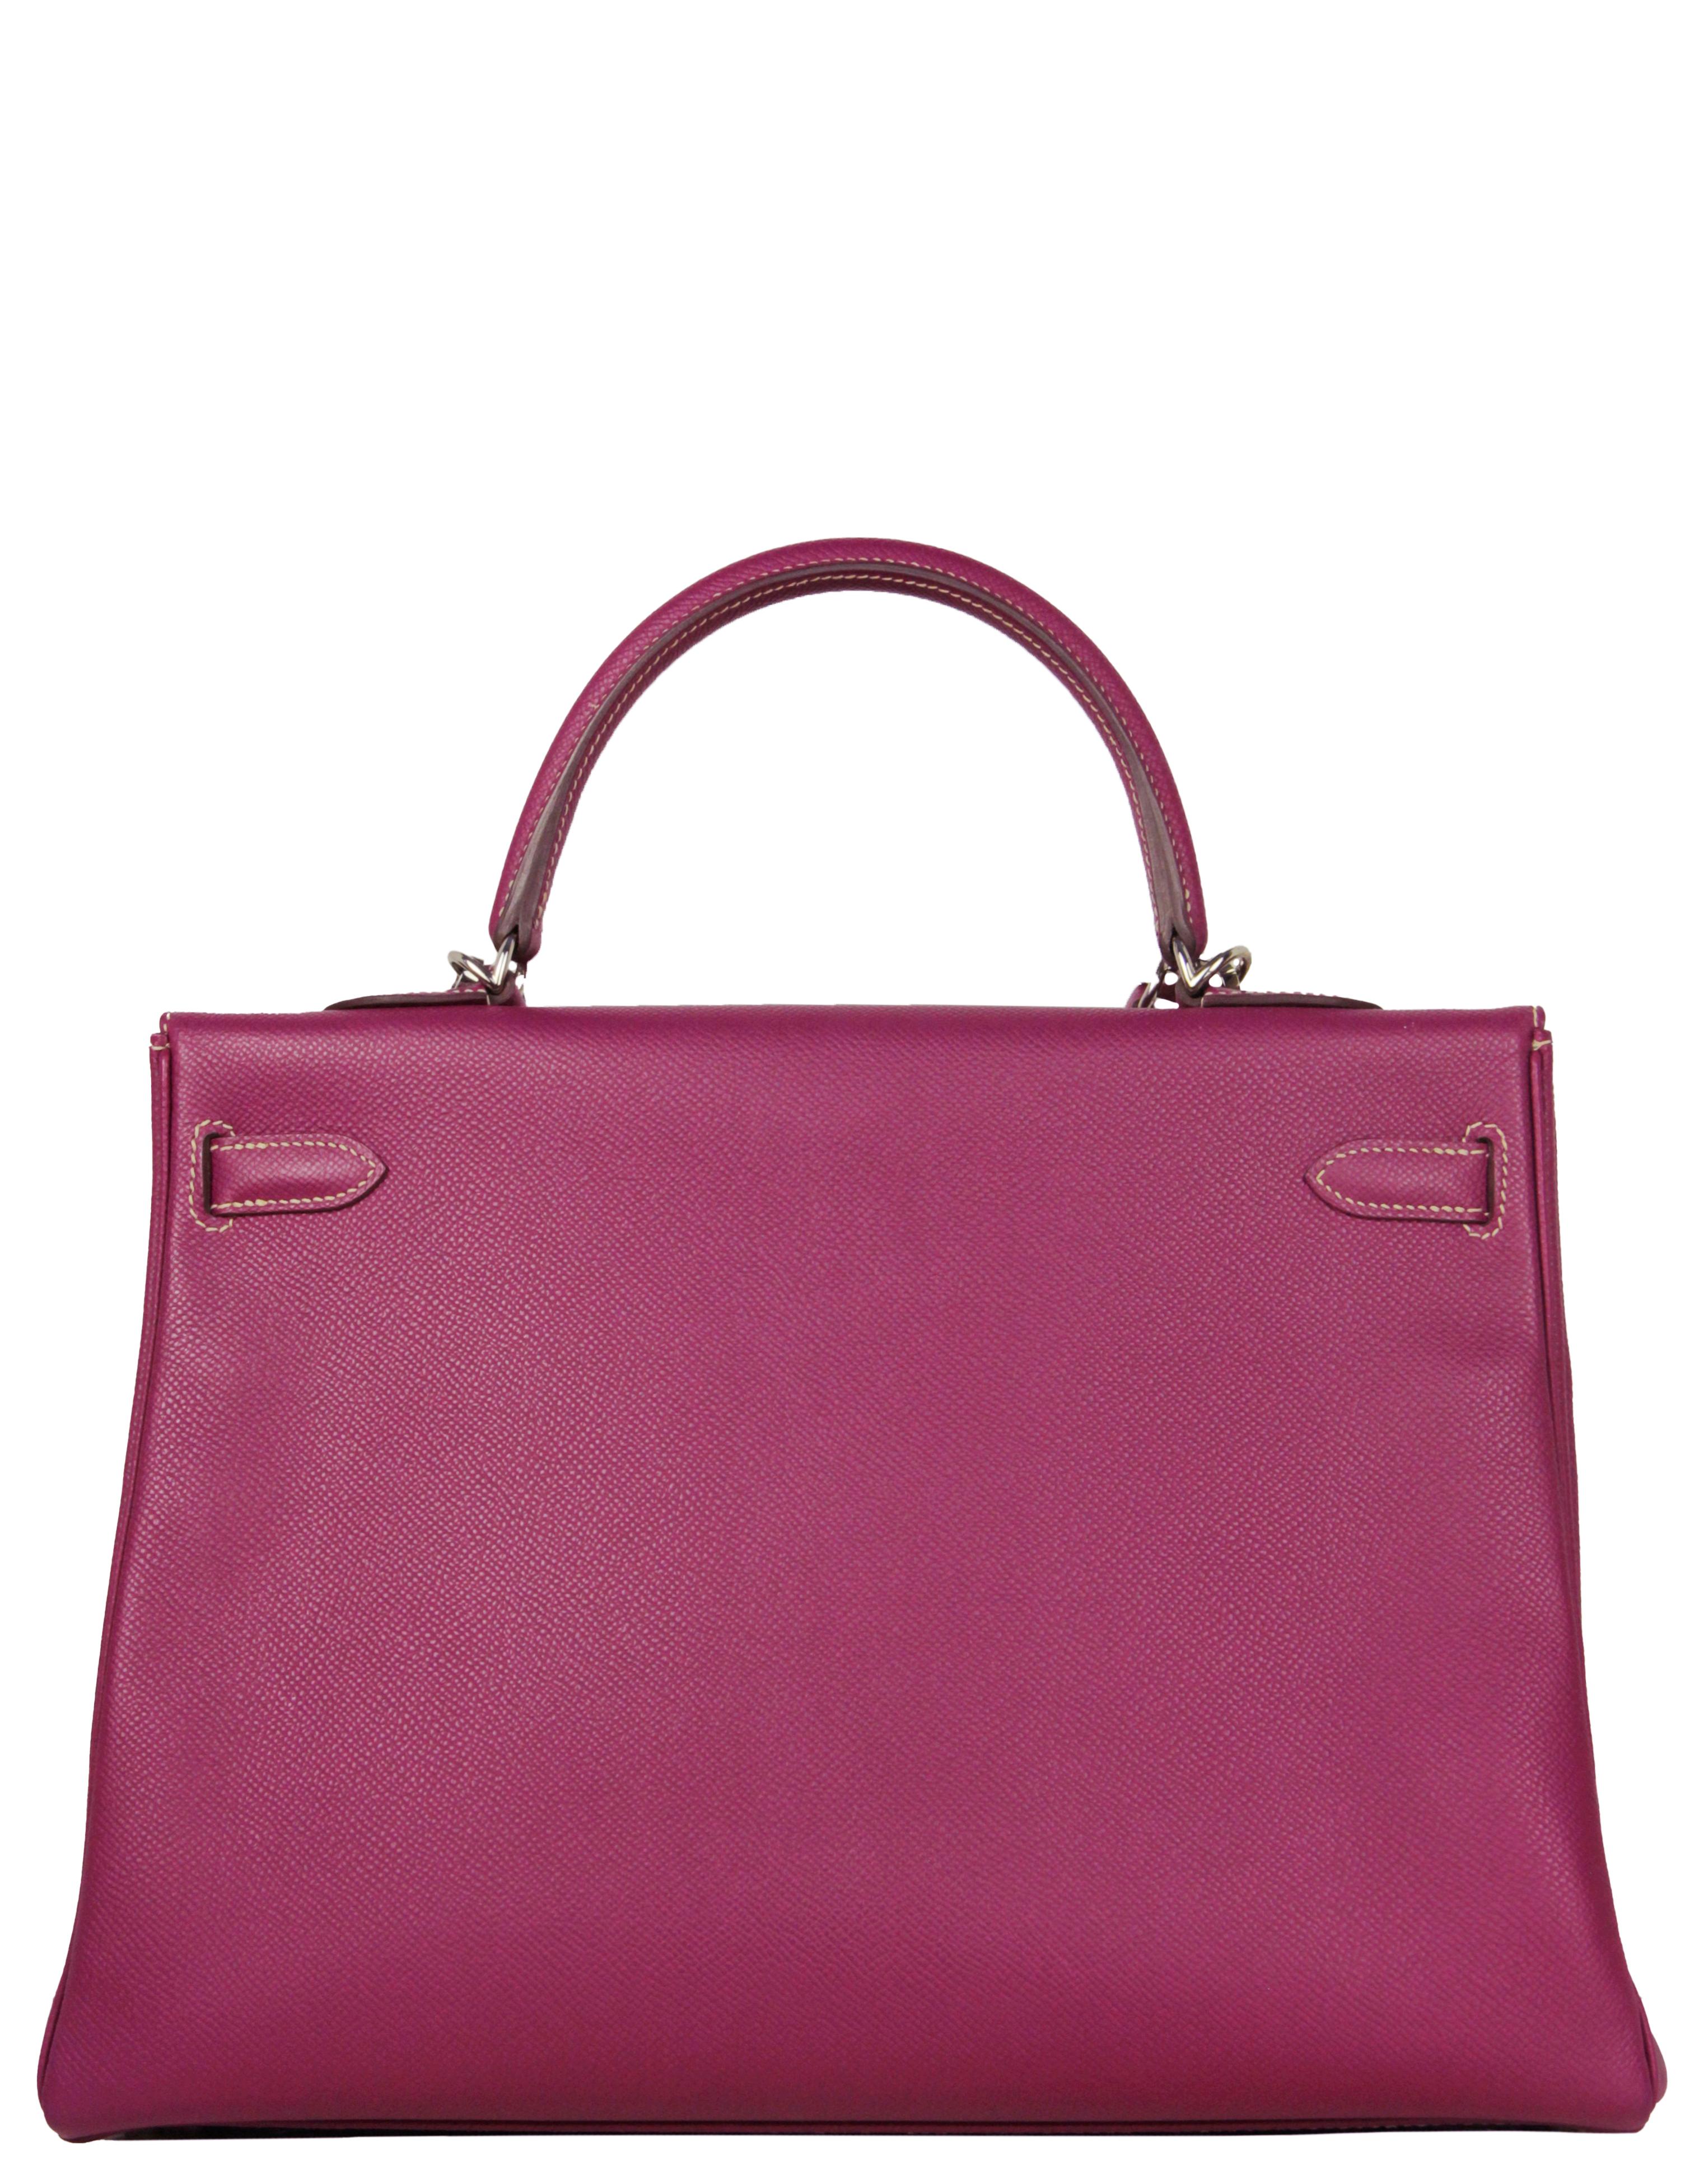 Pink Hermes Tosca/ Rose Tyrien Epsom Leather 35cm Candy Kelly Bag For Sale